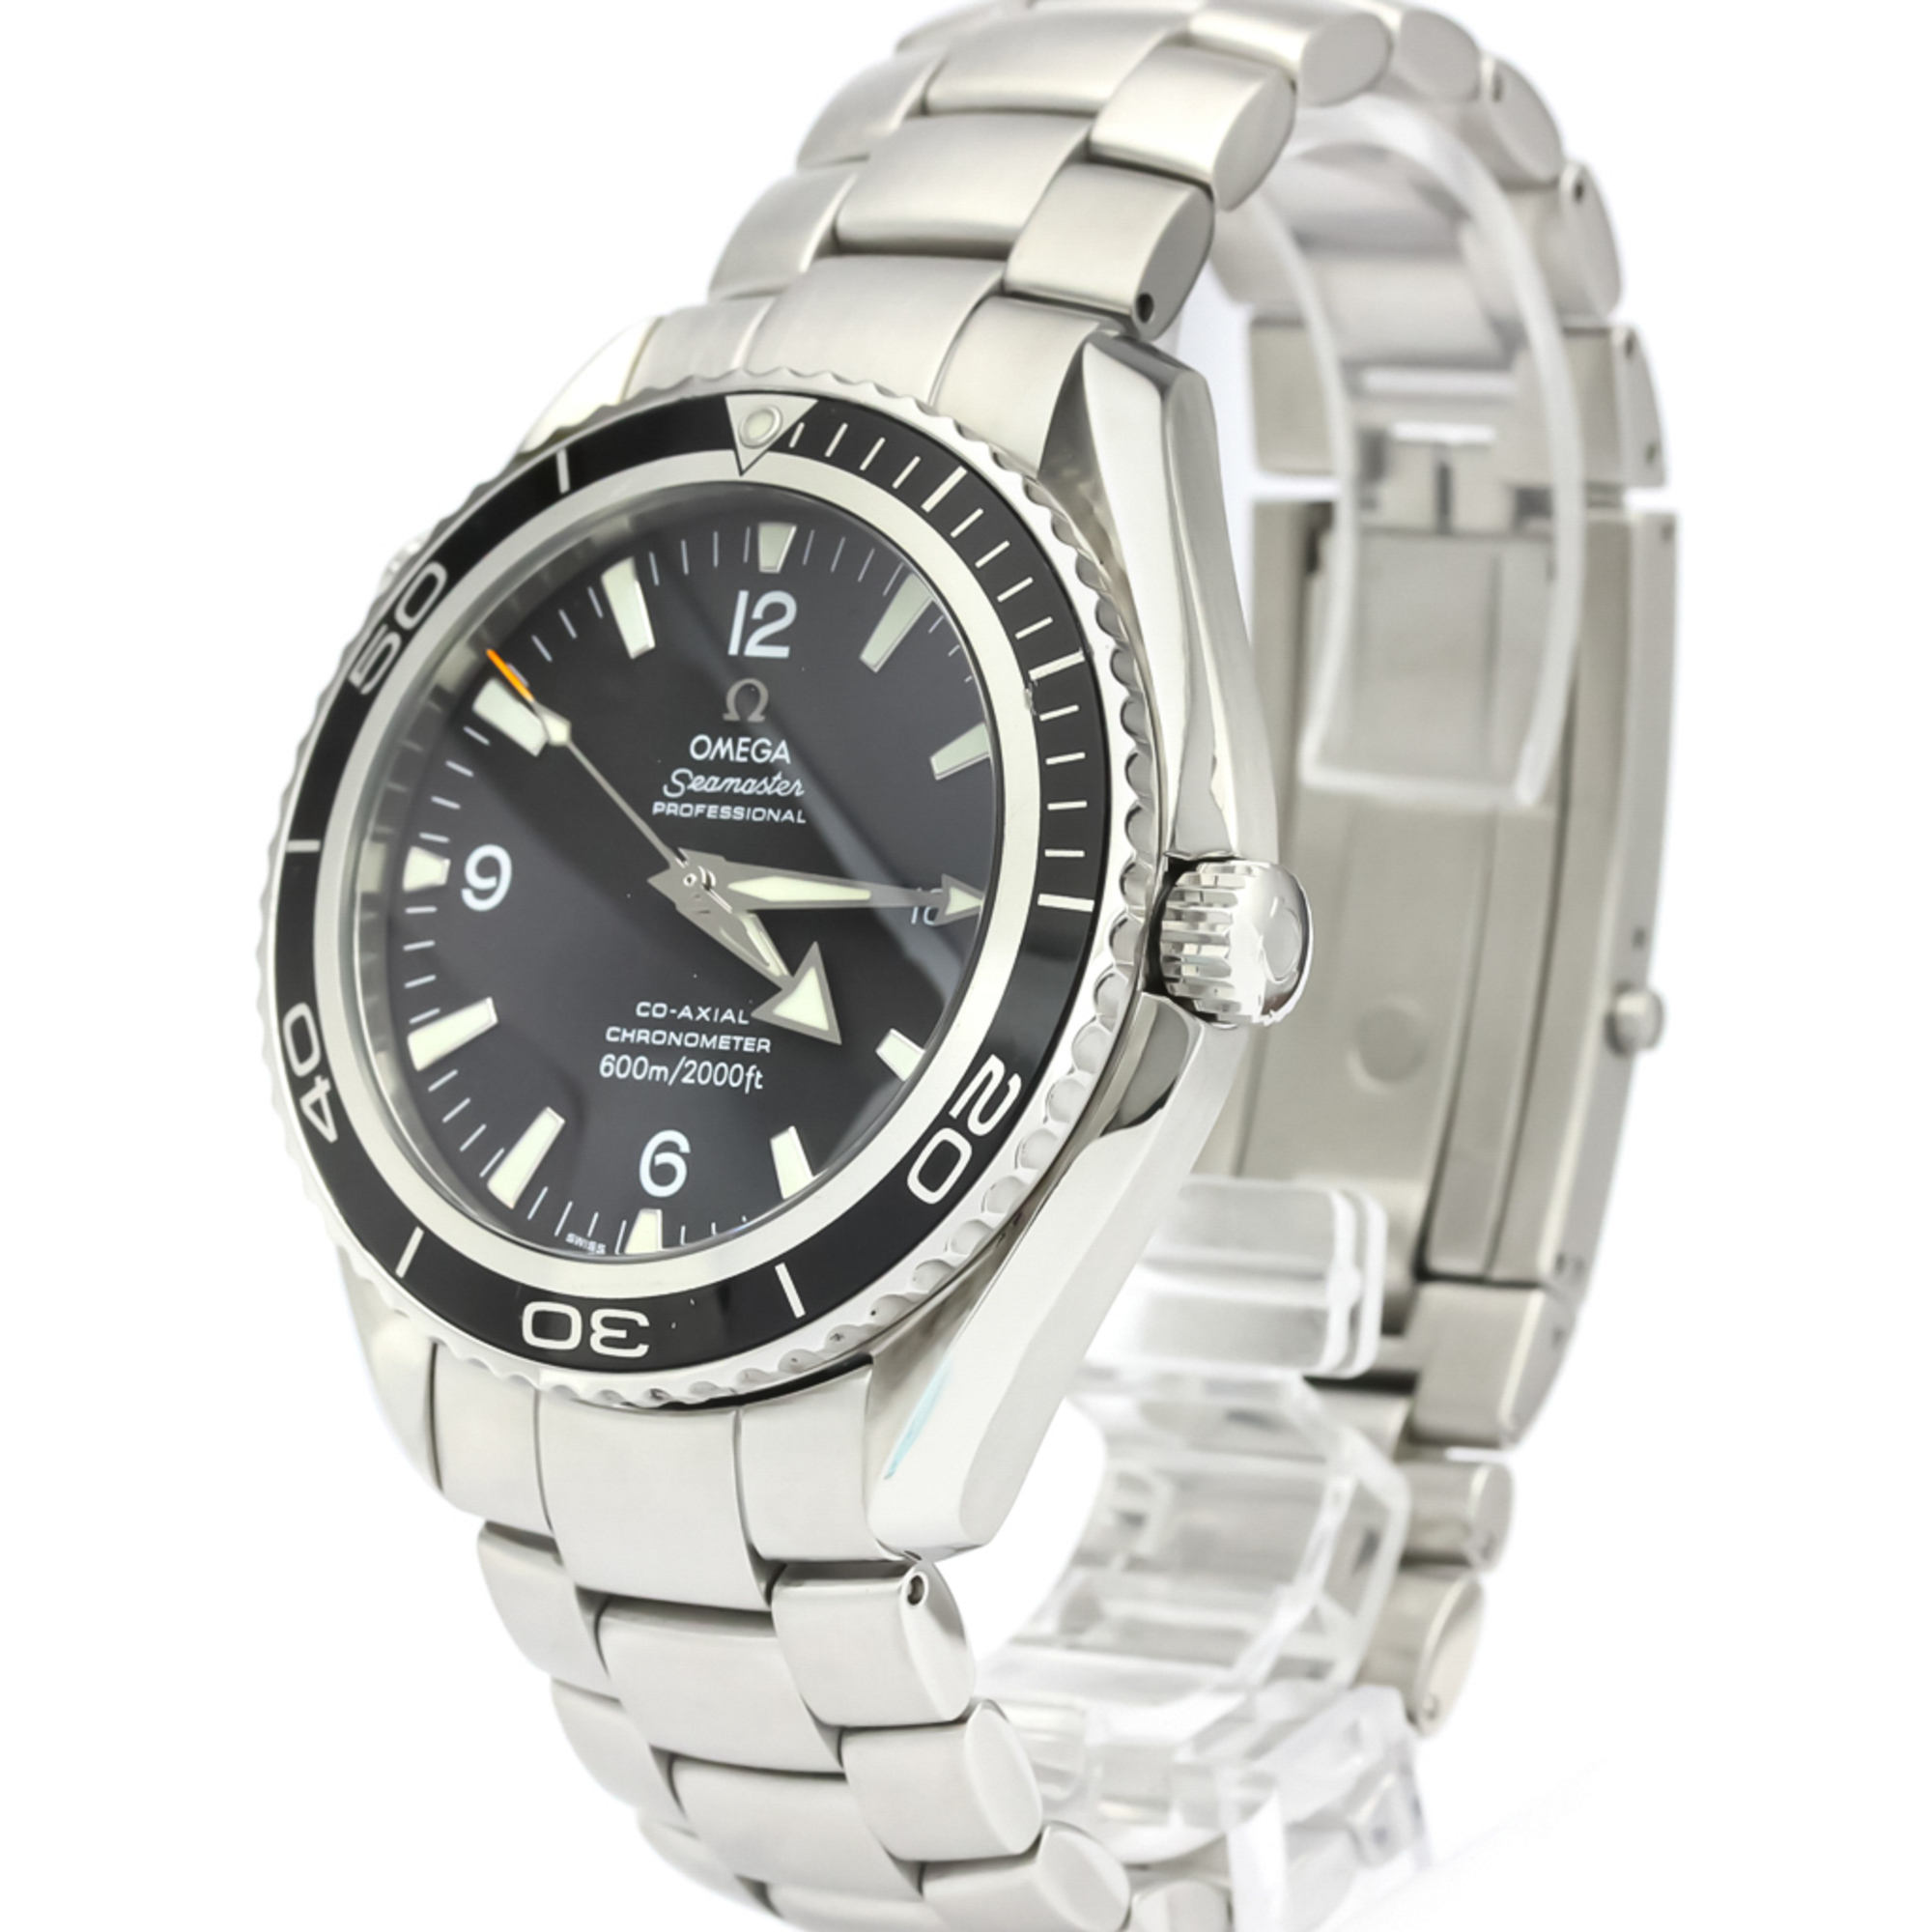 OMEGA Seamaster Planet Ocean Steel Automatic Watch 2200.50